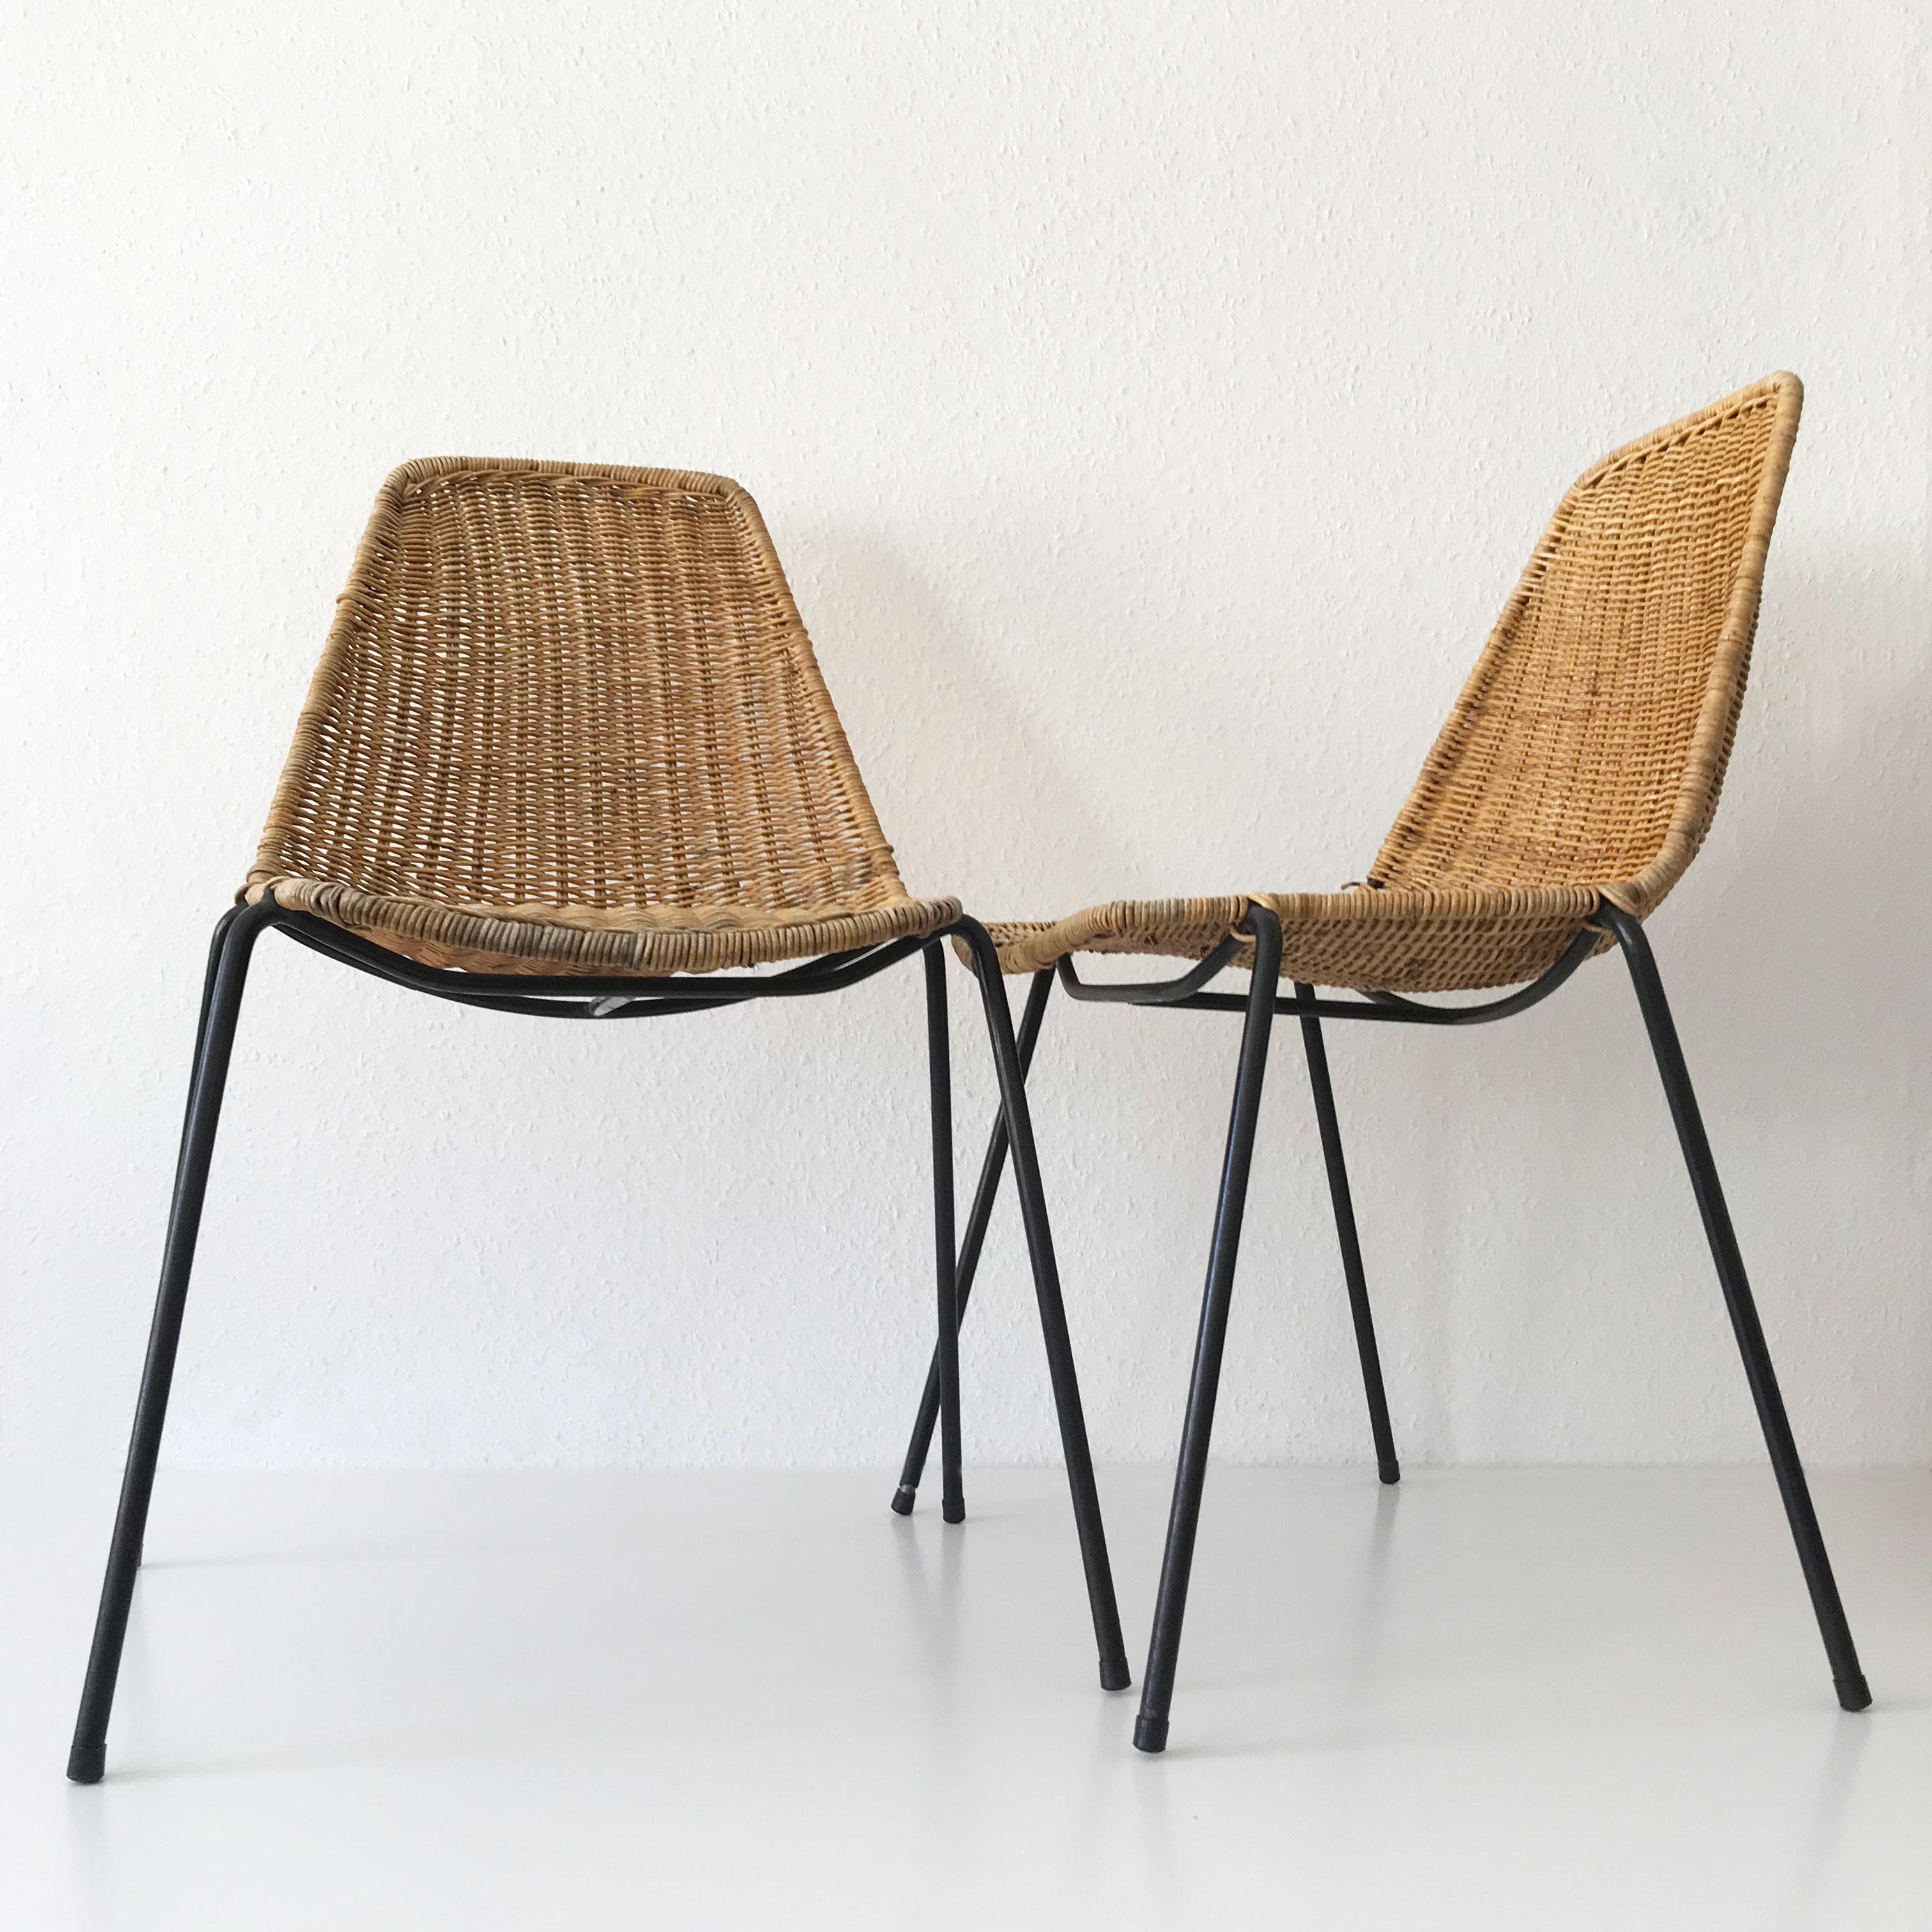 Mid-Century Modern Set of Two Basket Chairs and Stool by Gian Franco Legler, 1951, Switzerland